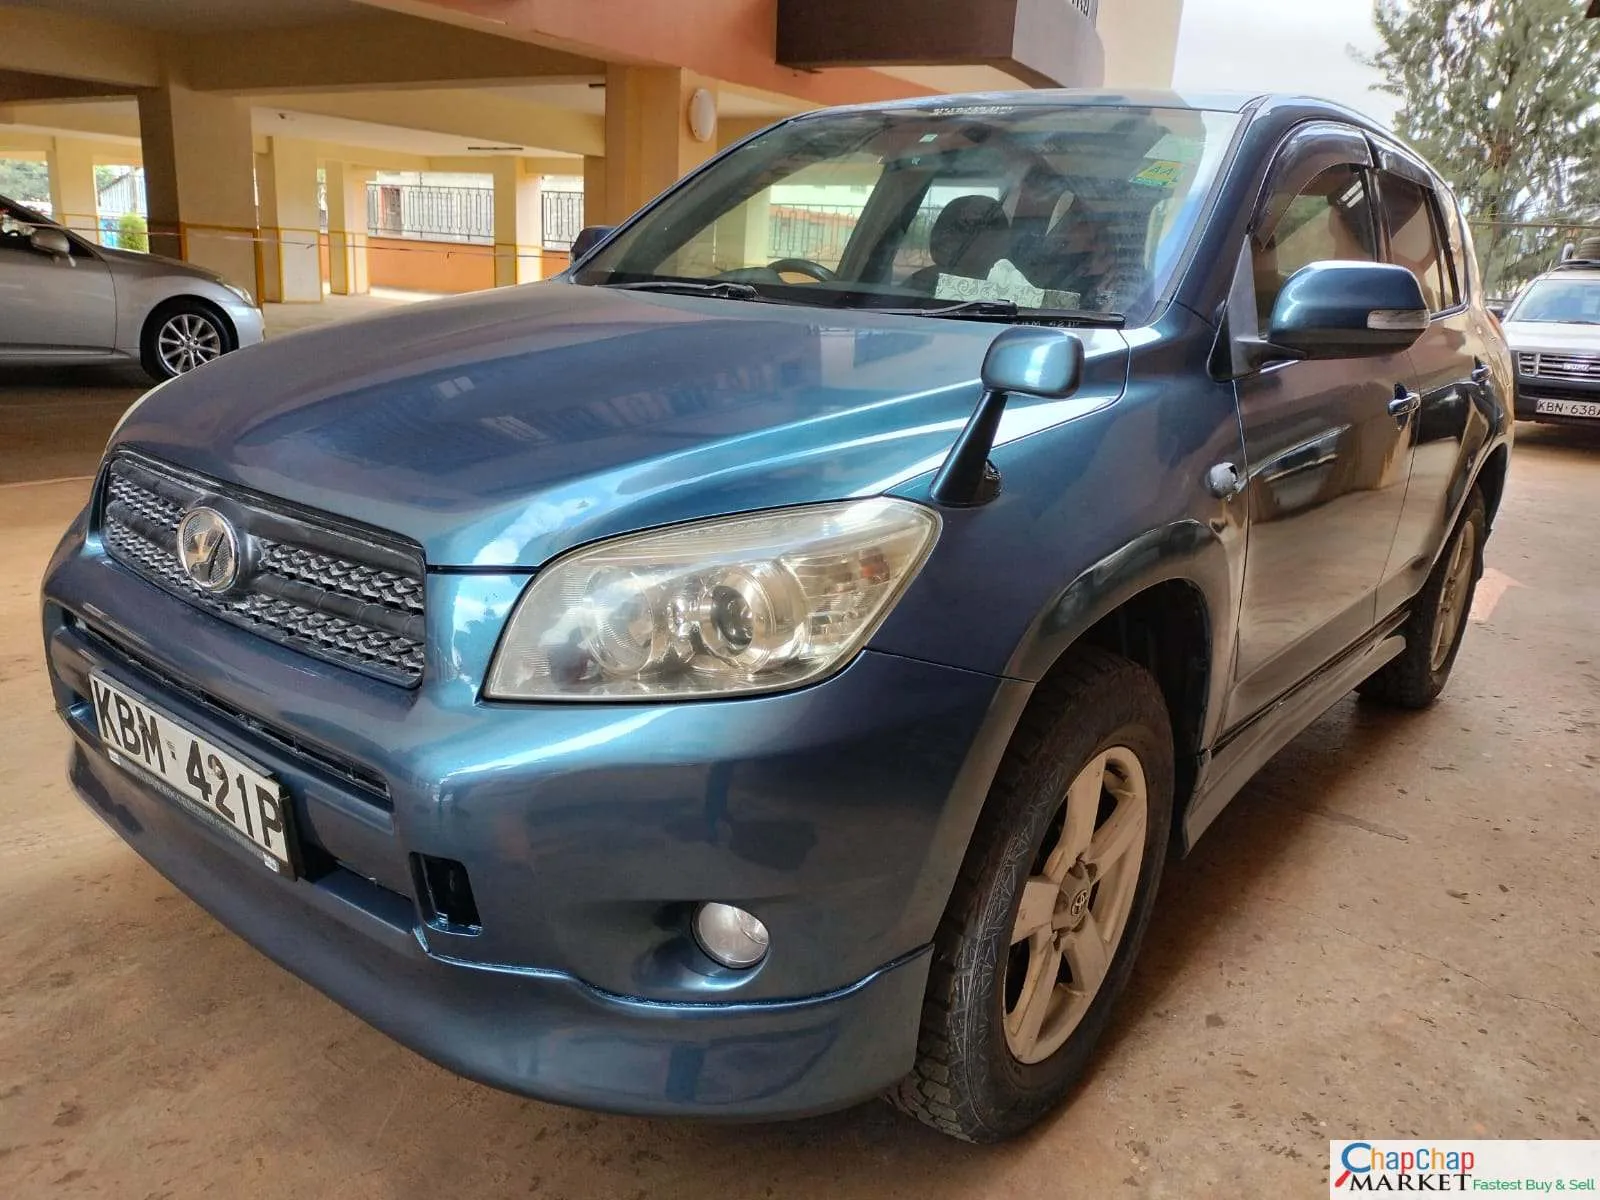 Cars Cars For Sale/Vehicles-Toyota RAV4 CHEAPEST You Pay 30% Deposit Trade in OK EXCLUSIVE 5